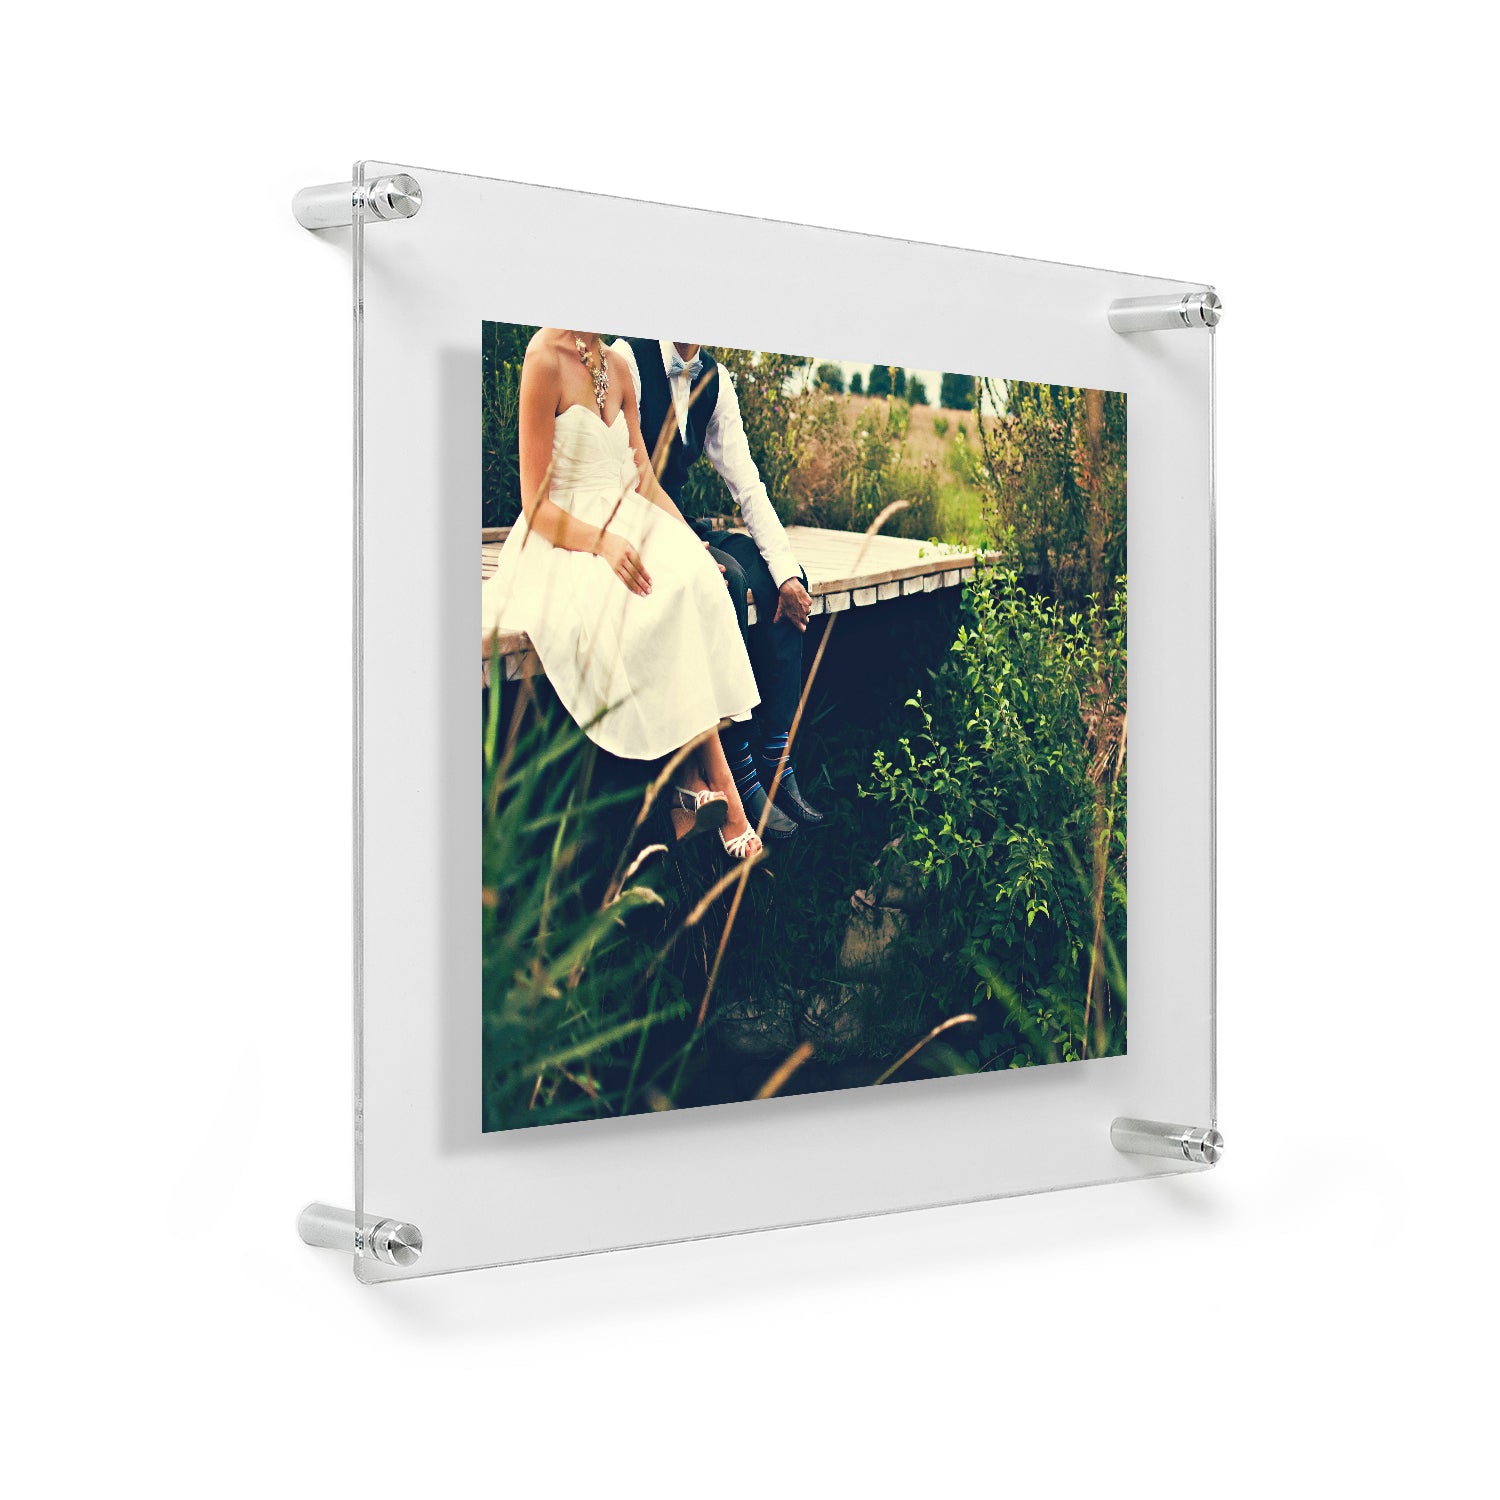 A3 Clear Acrylic Sandwich / Poster Holder / Sign Holders / Perspex